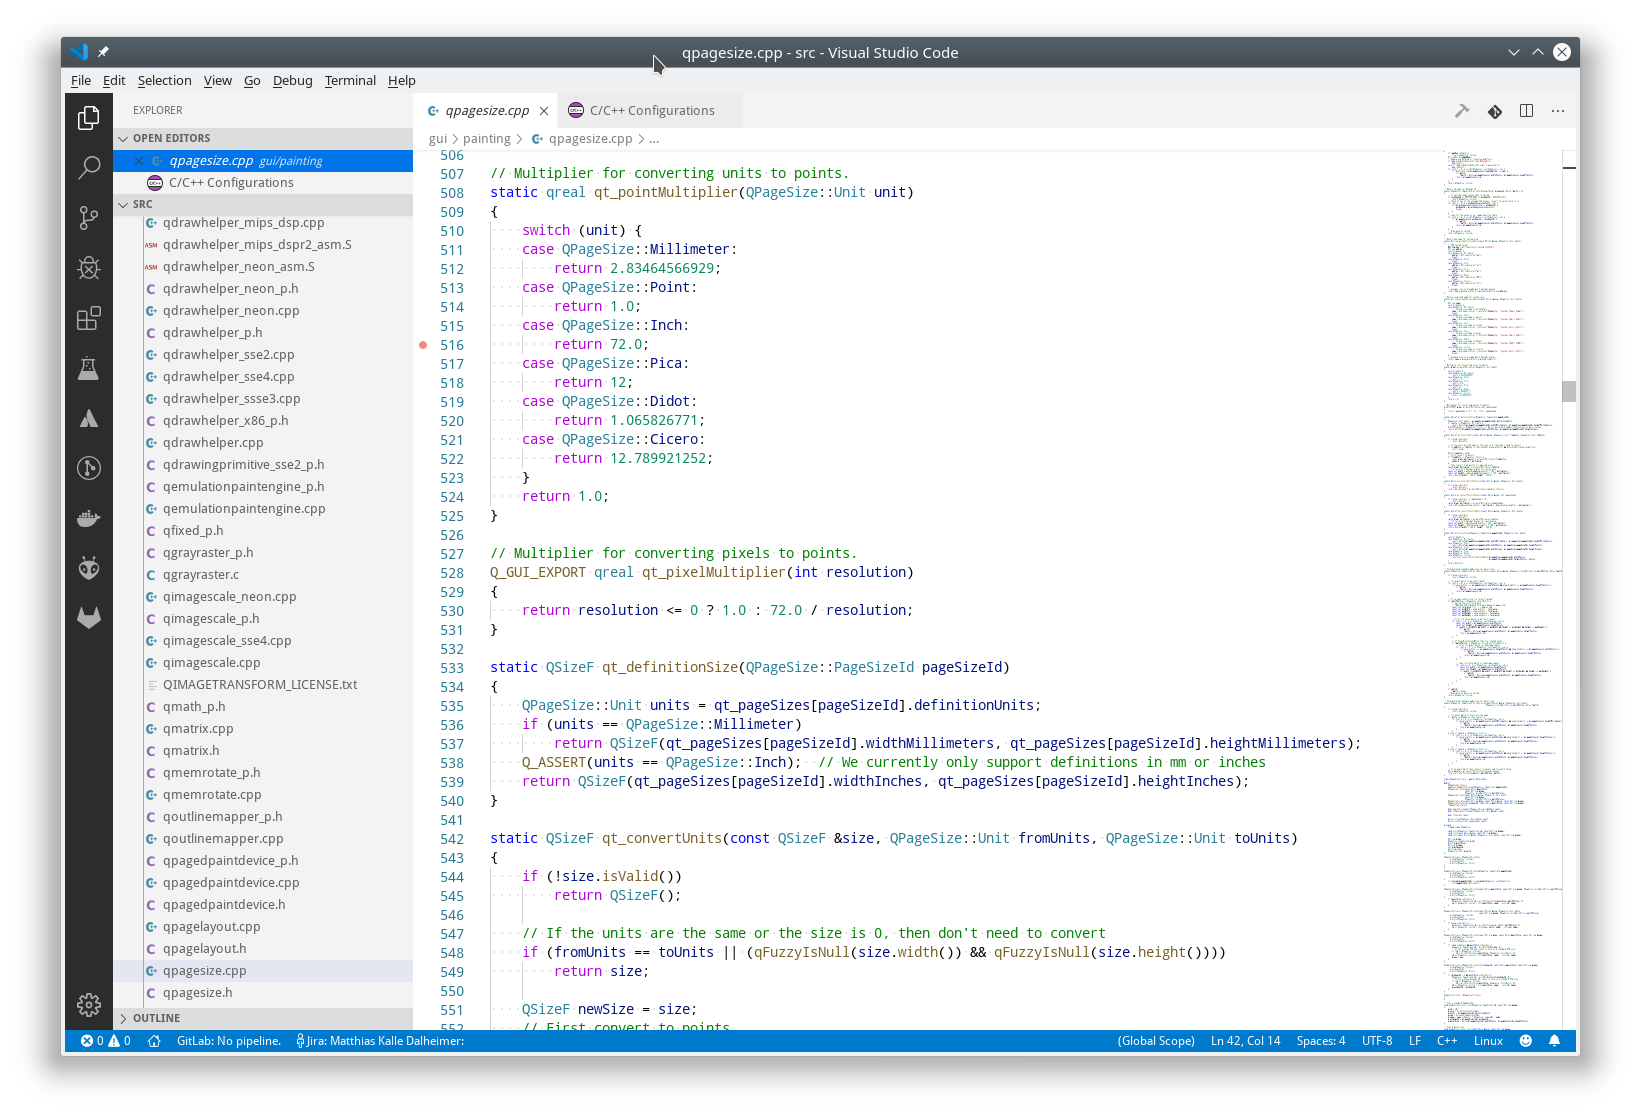 is there something like visual studio express for mac